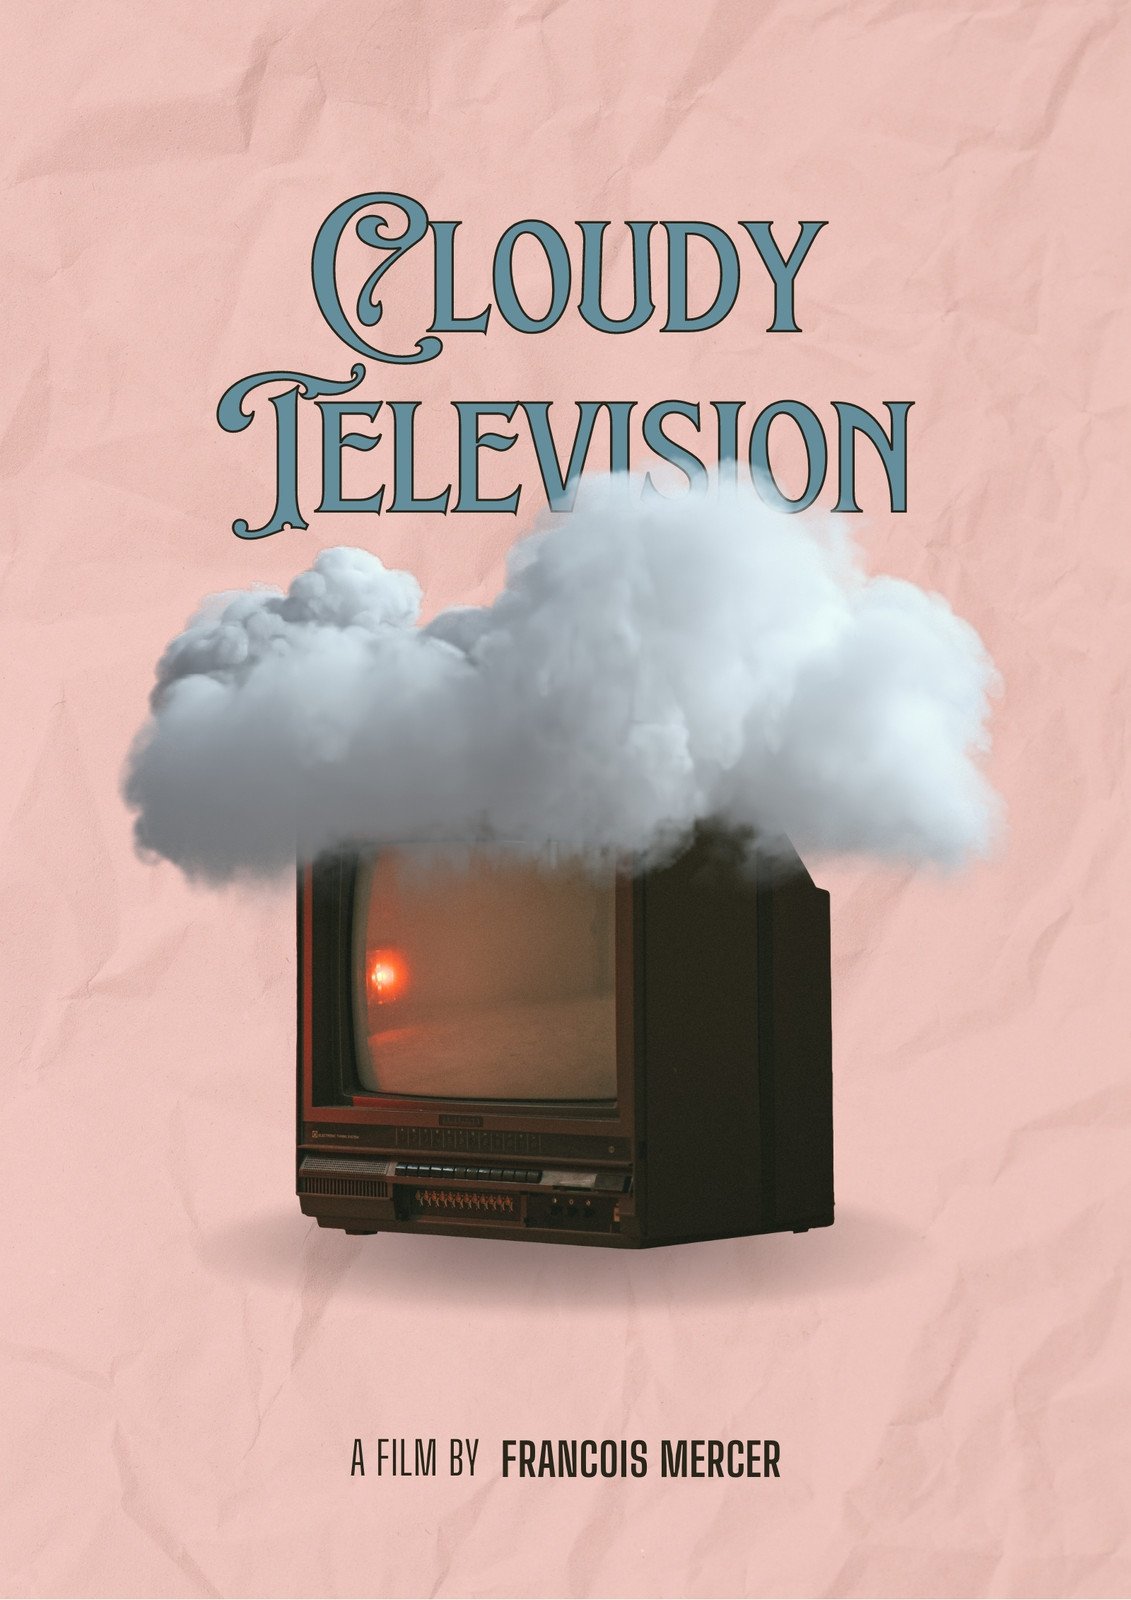 Pink Retro Cloudy Television Movie Poster